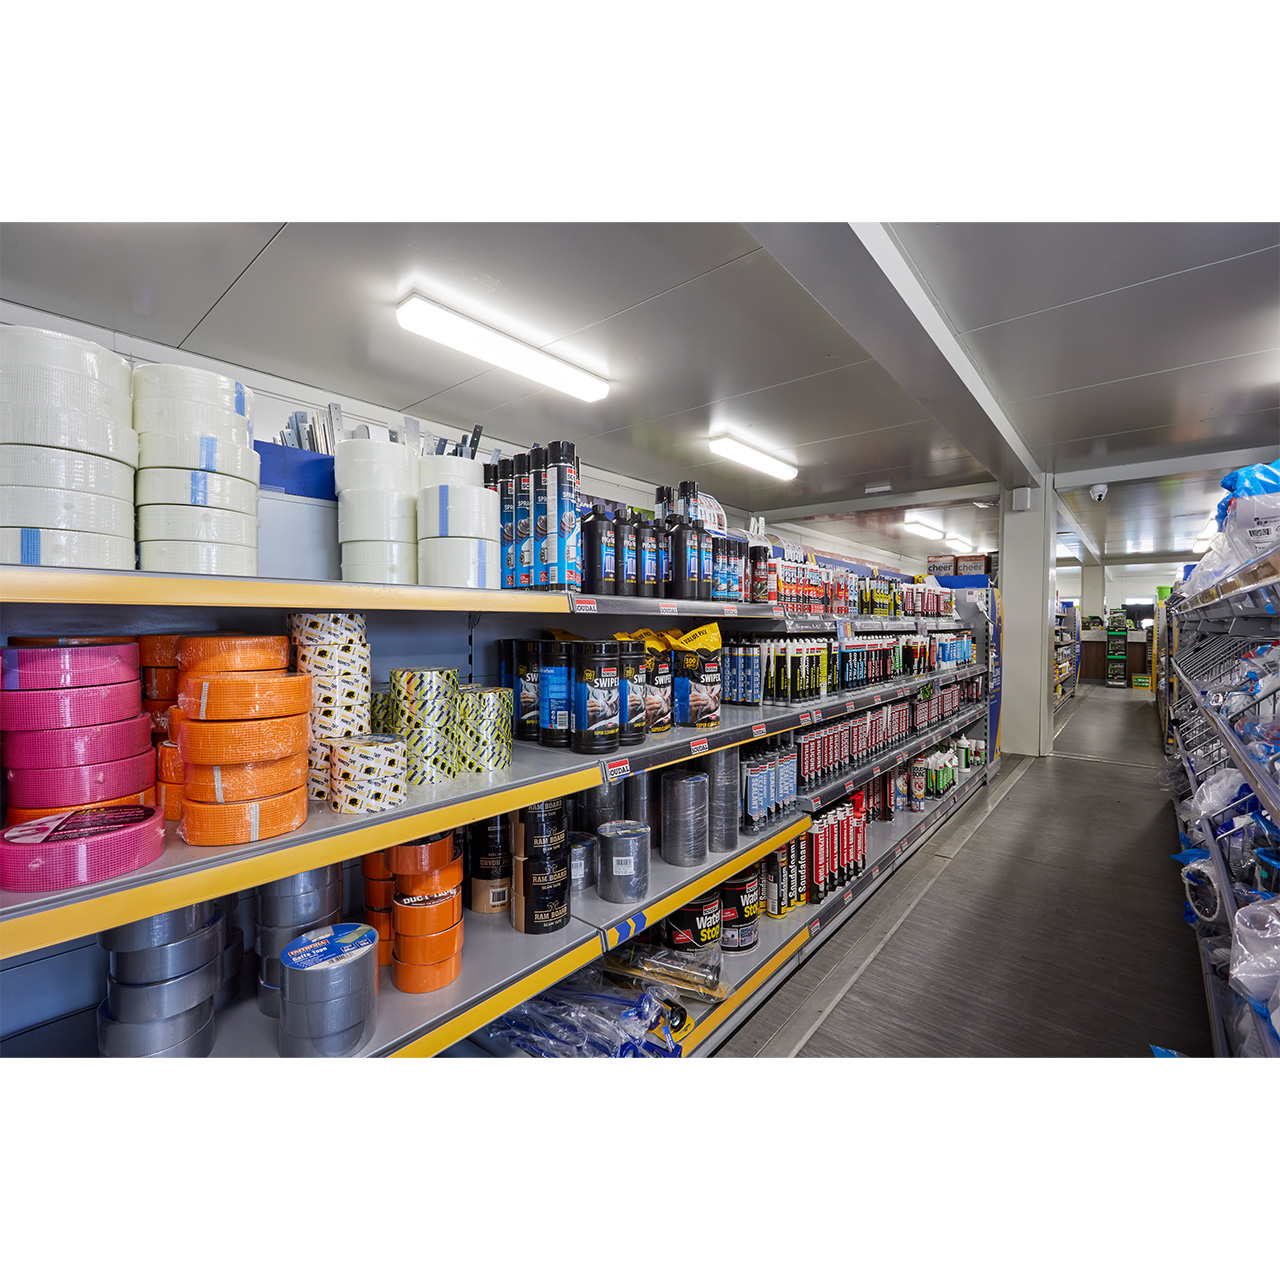 Images MKM Building Supplies Manchester Central